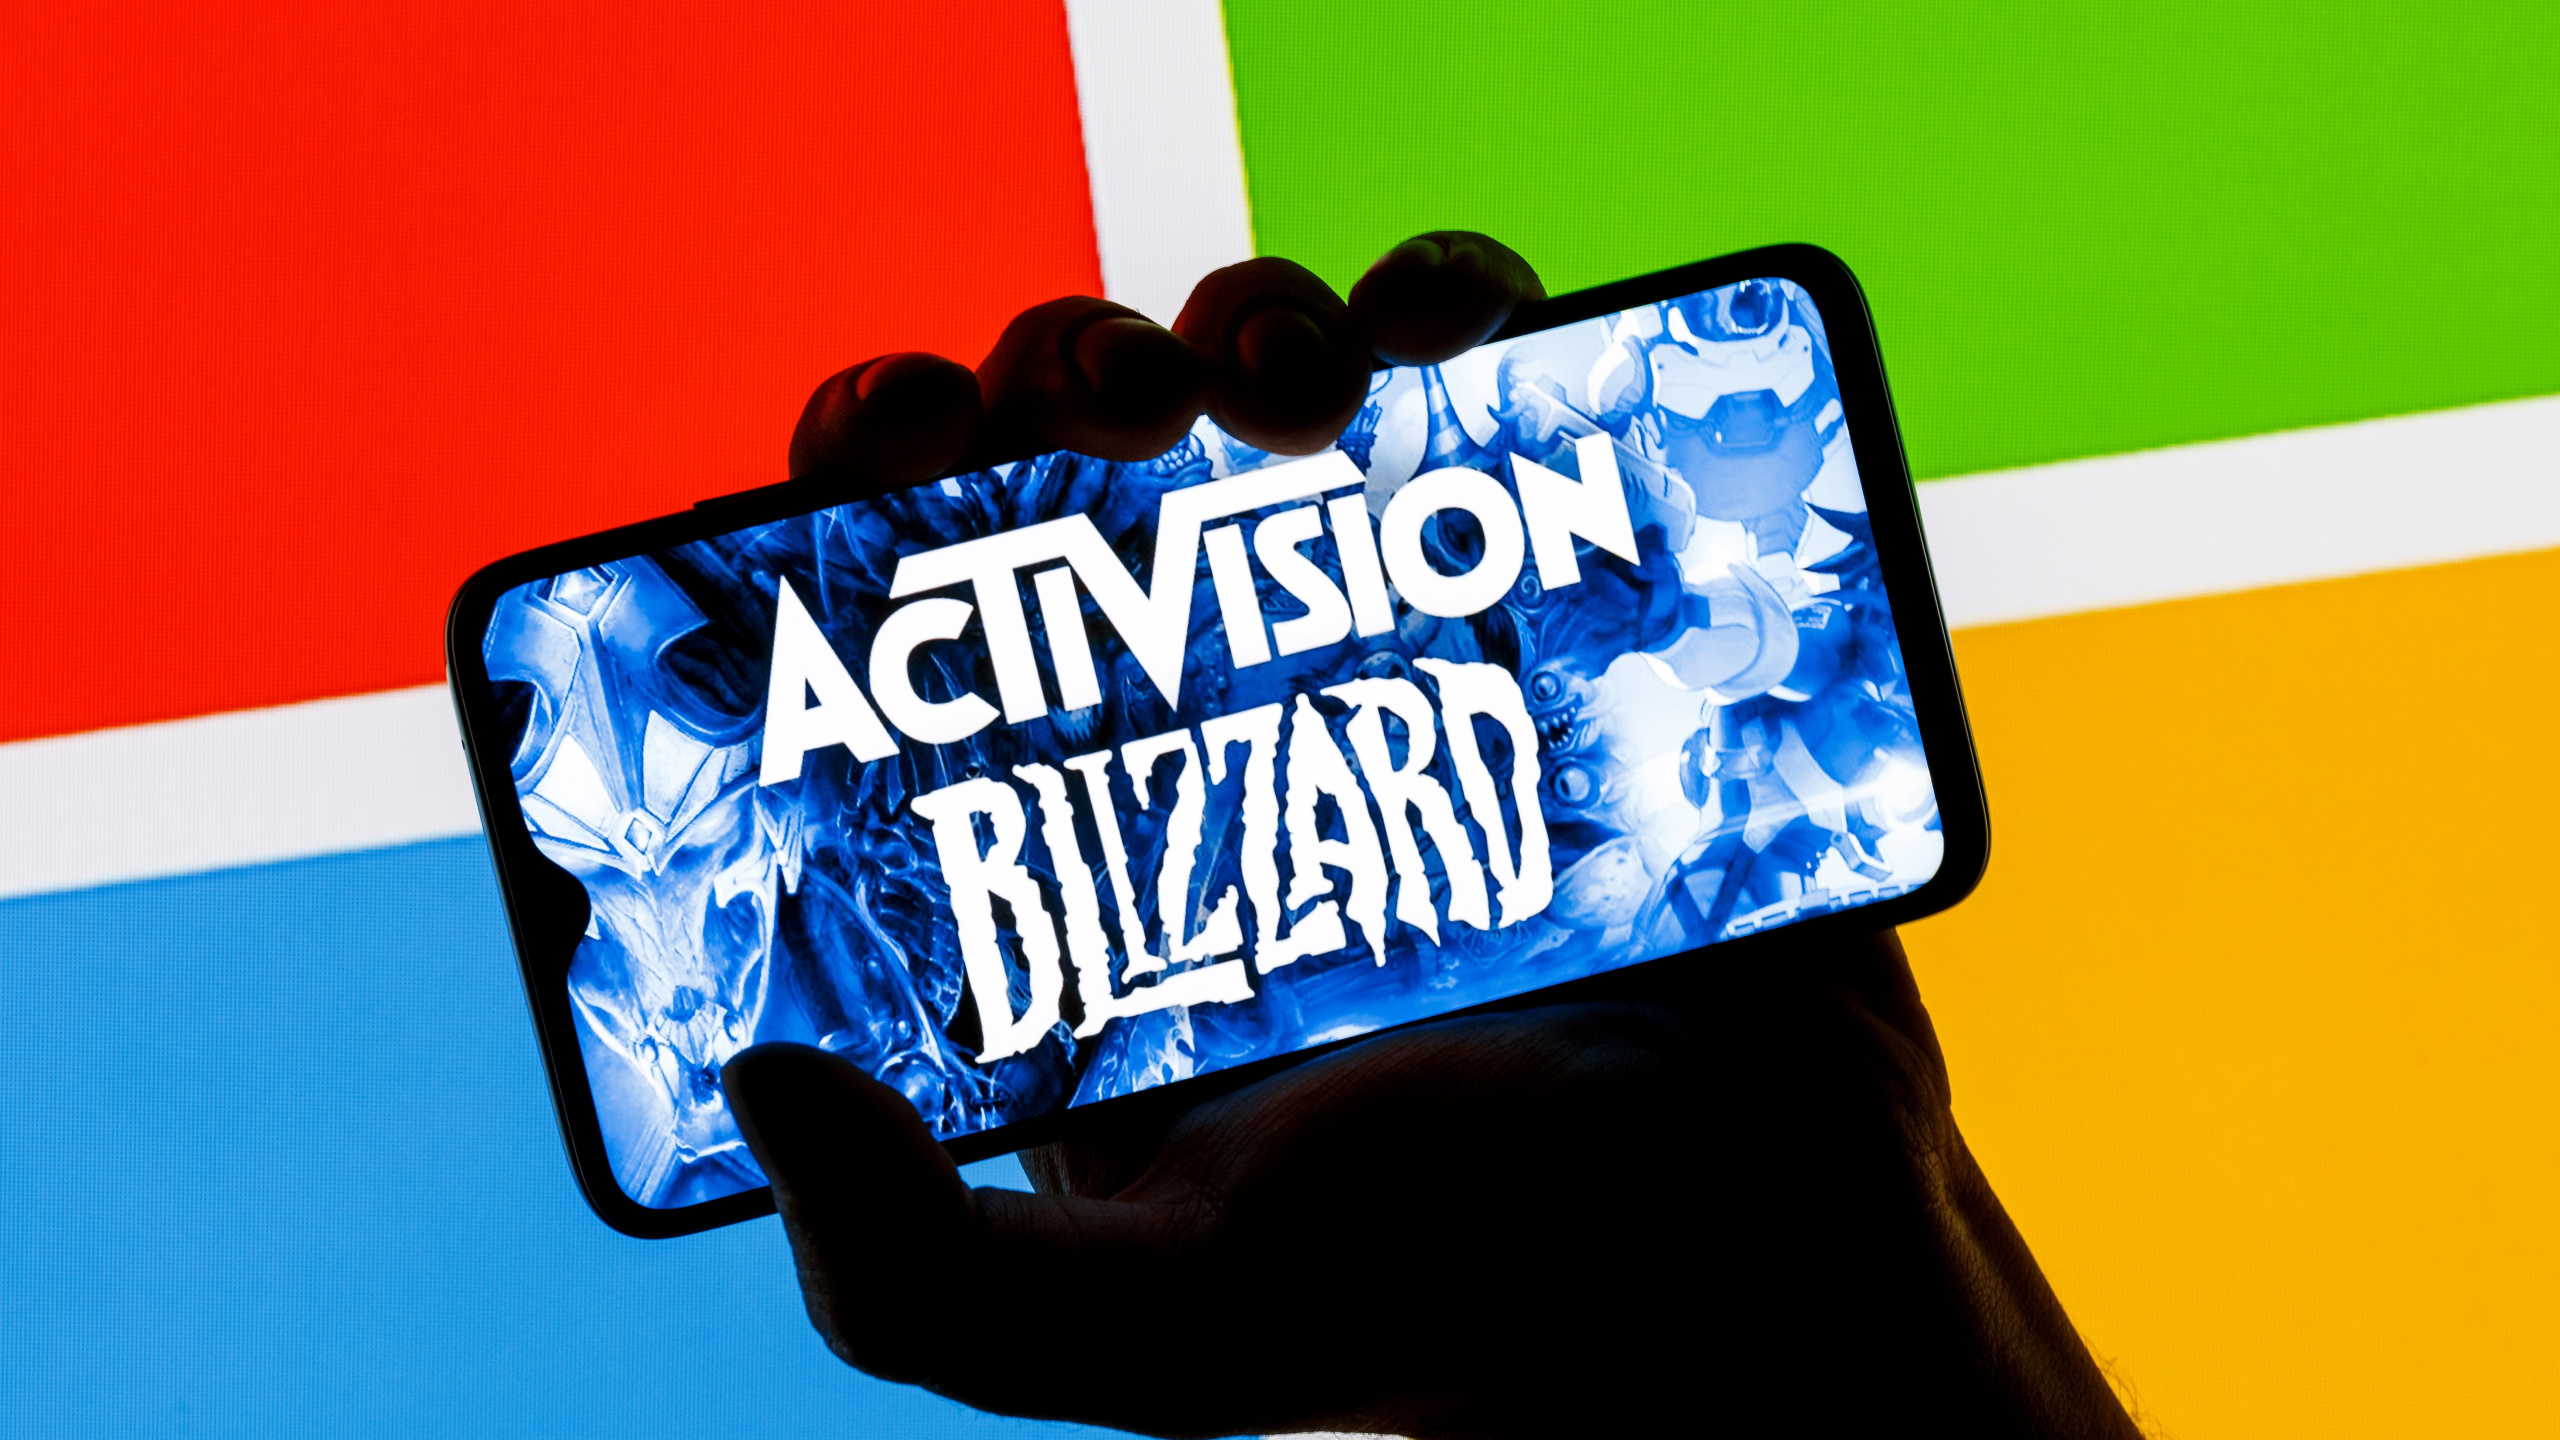 End of saga: Microsoft gets green light to buy Activision Blizzard, UK regulators happy with new deal